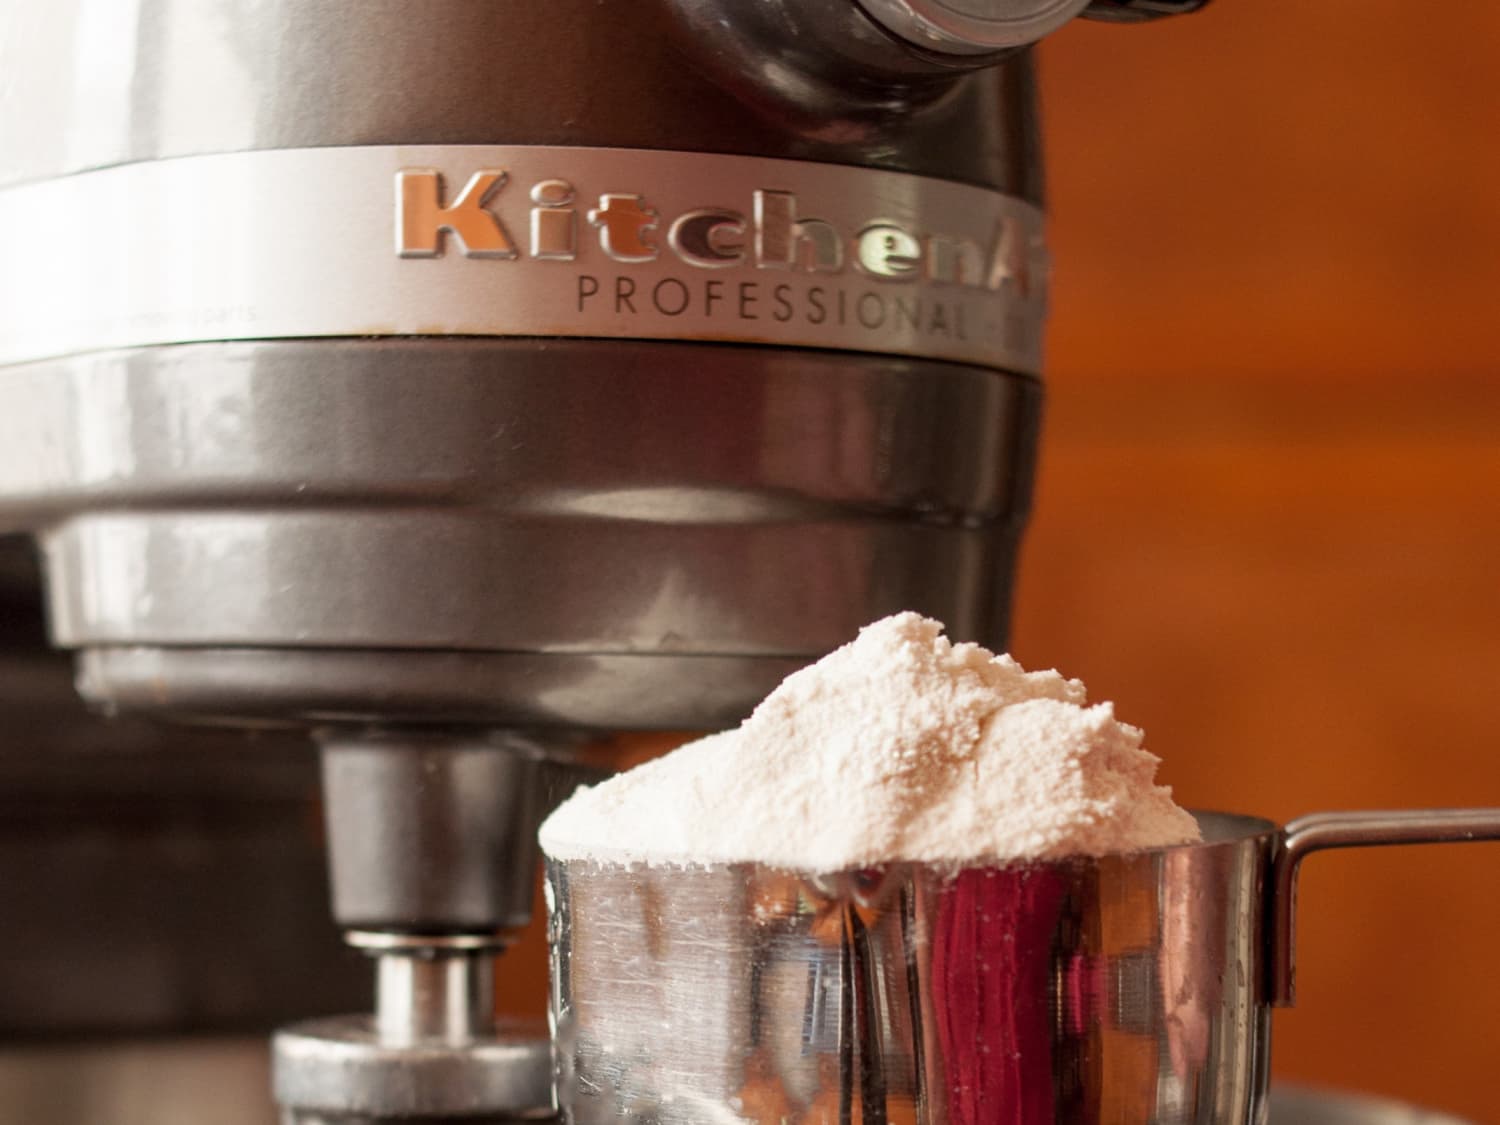 The Best Way to Avoid Messes When Using a Stand Mixer